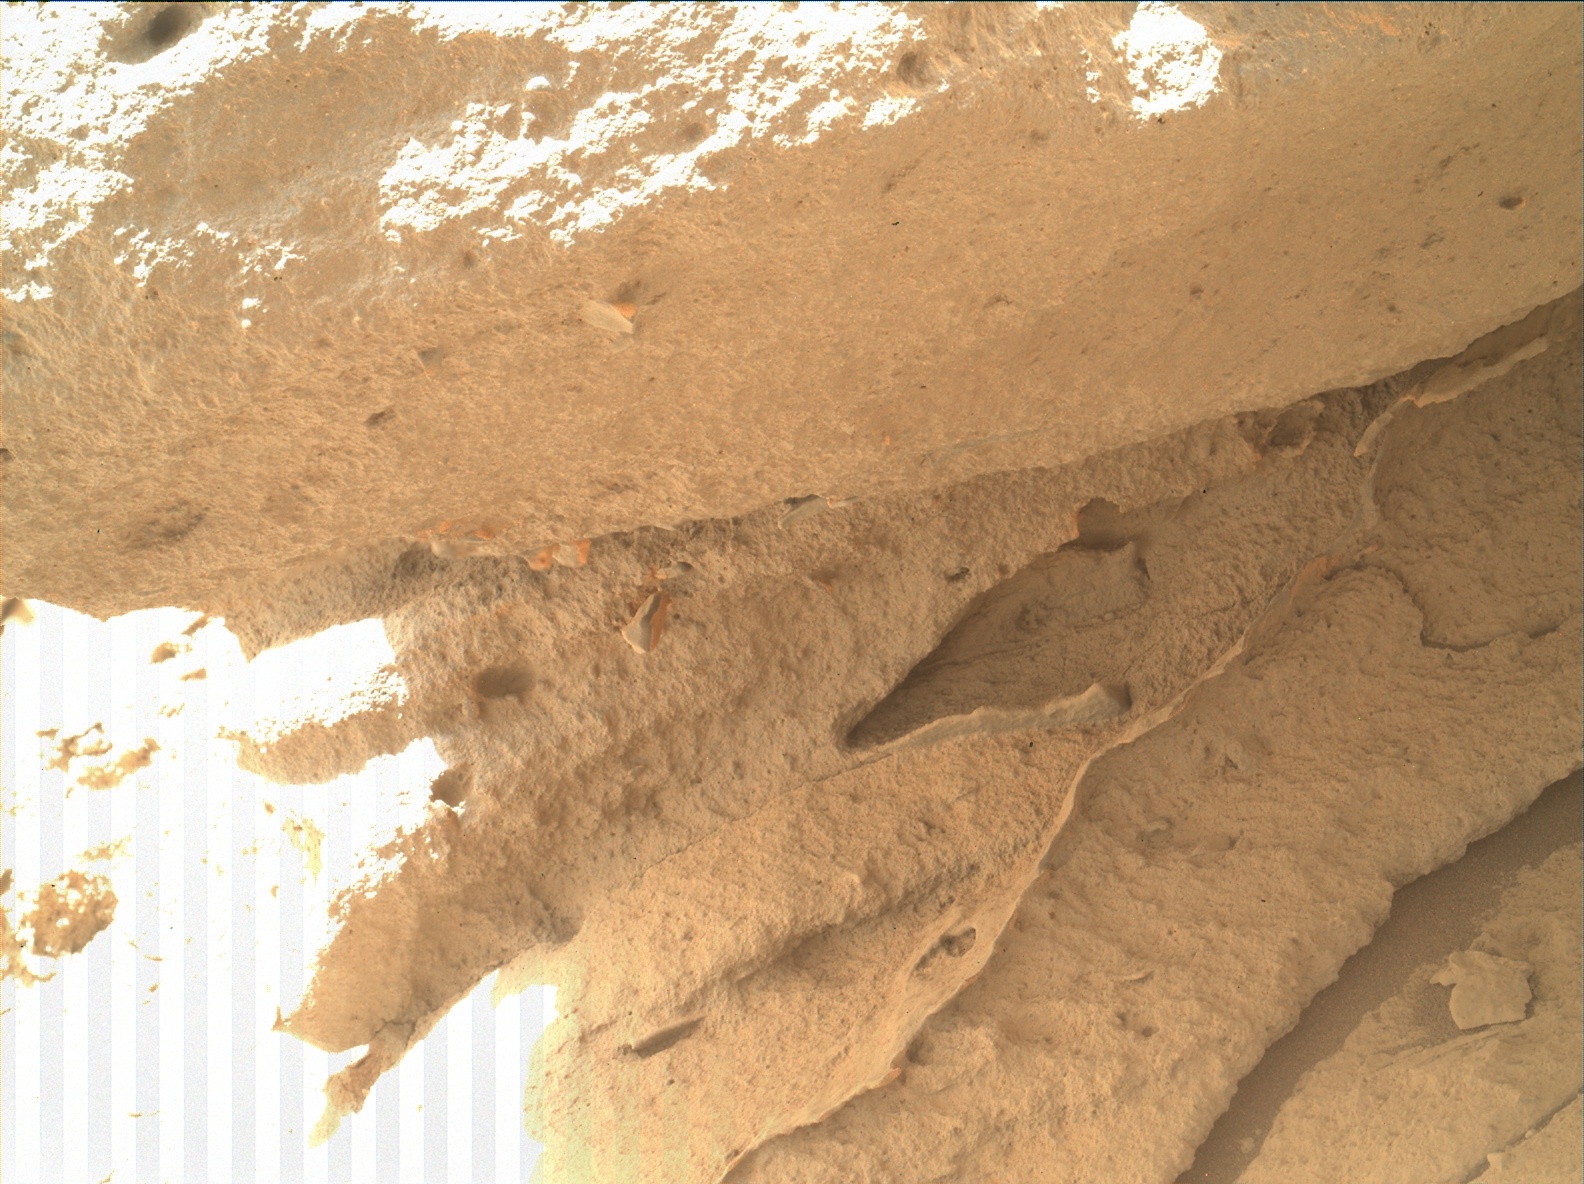 Nasa's Mars rover Curiosity acquired this image using its Mars Hand Lens Imager (MAHLI) on Sol 443